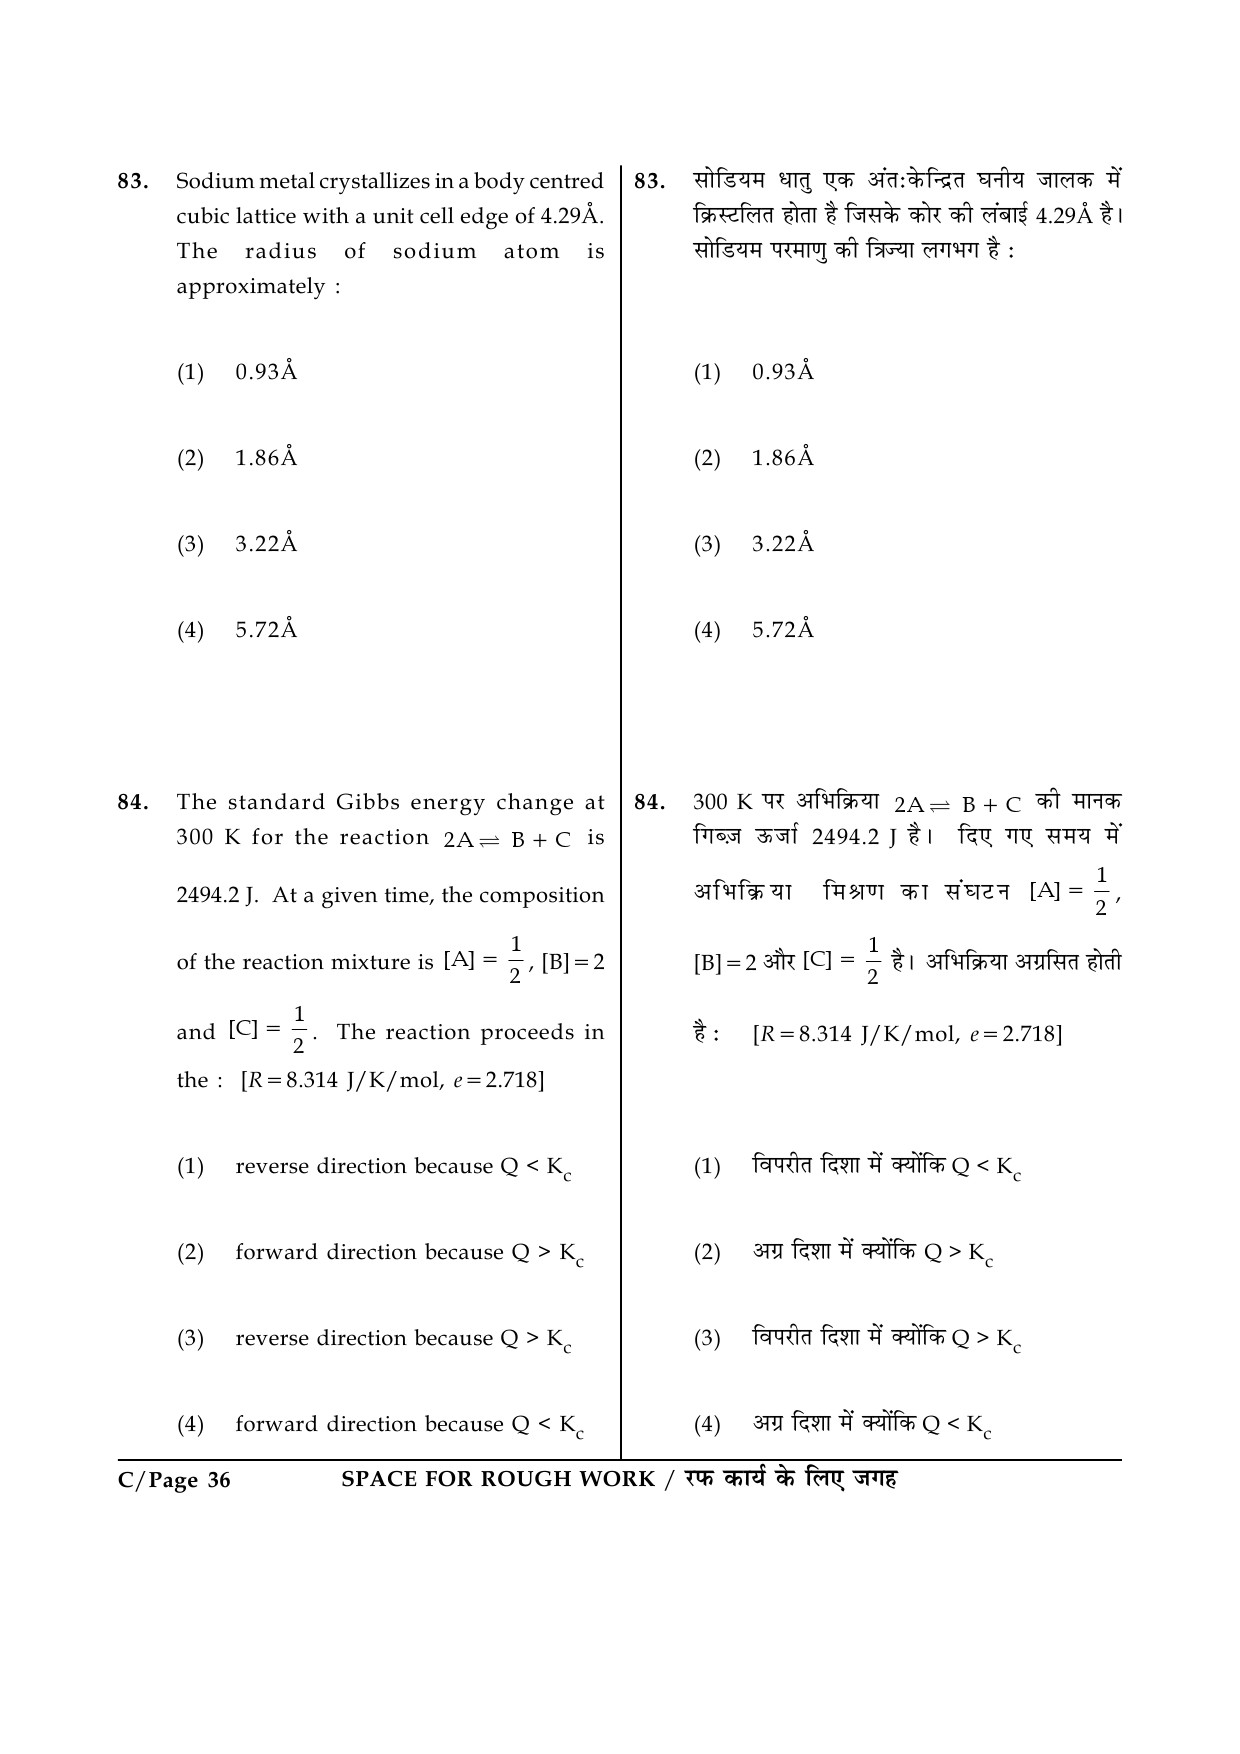 JEE Main Exam Question Paper 2015 Booklet C 36